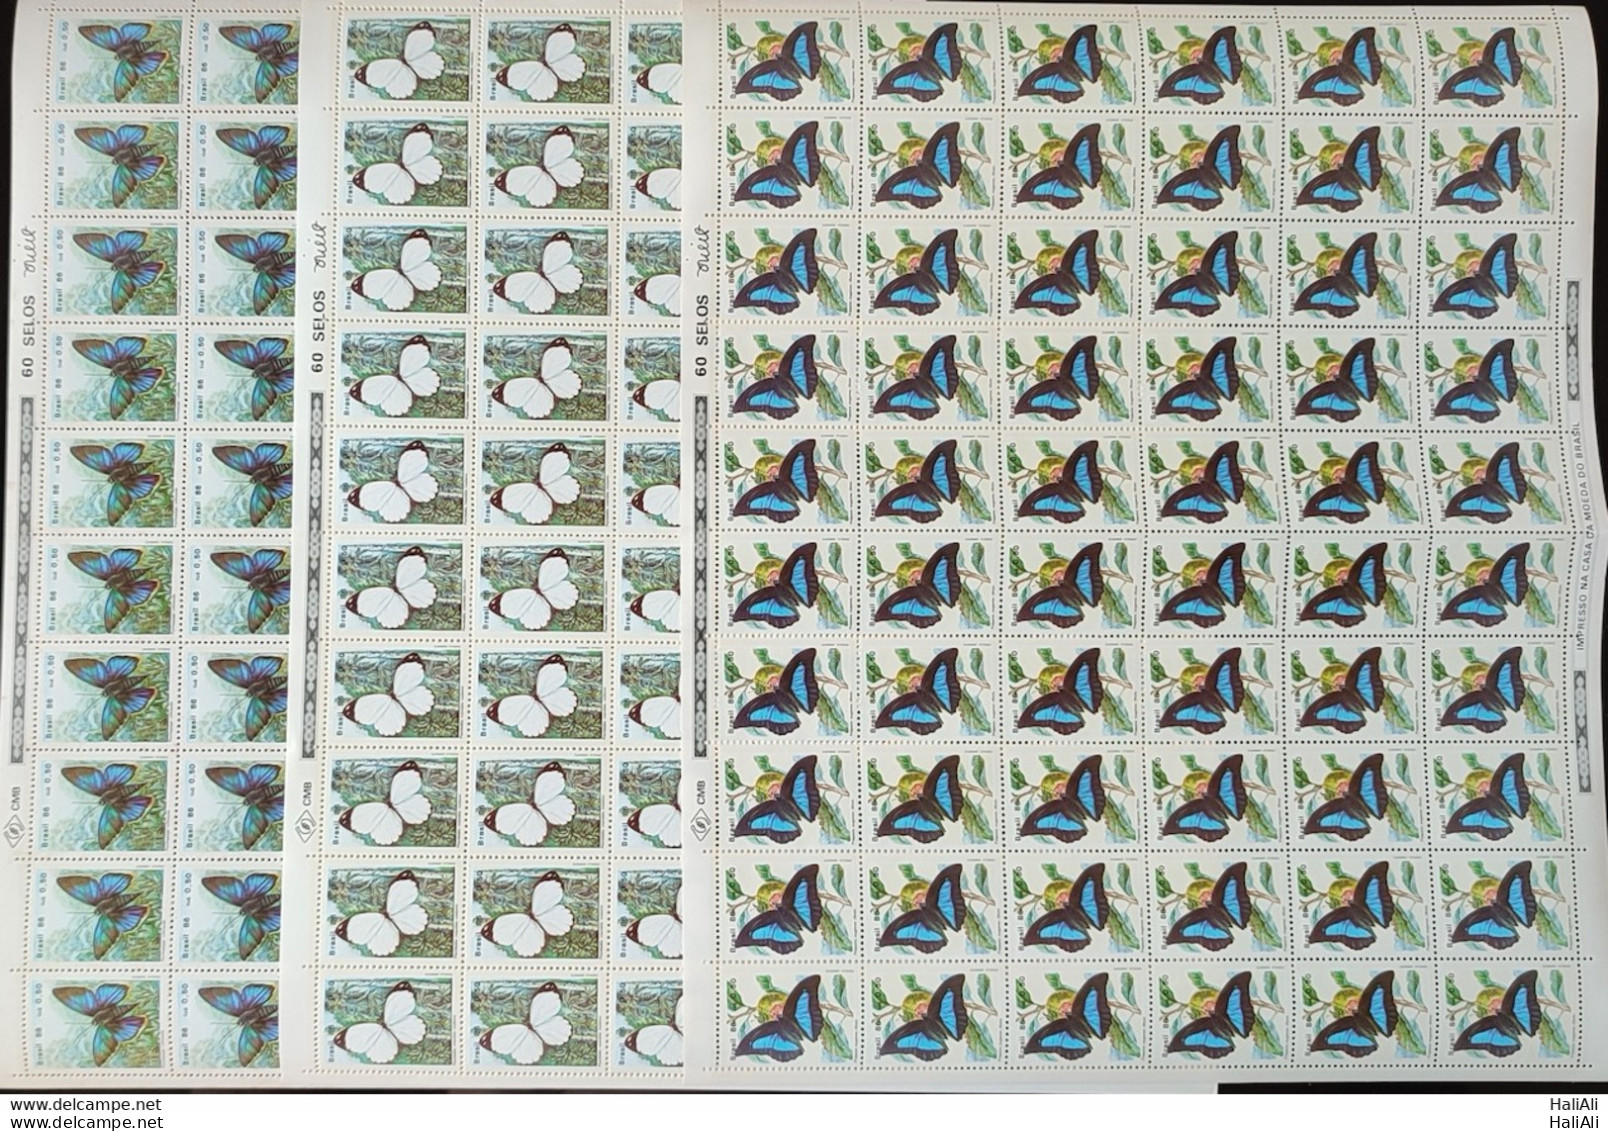 C 1512 Brazil Stamp Butterfly Insects 1986 Sheet Complete Series.jpg - Neufs